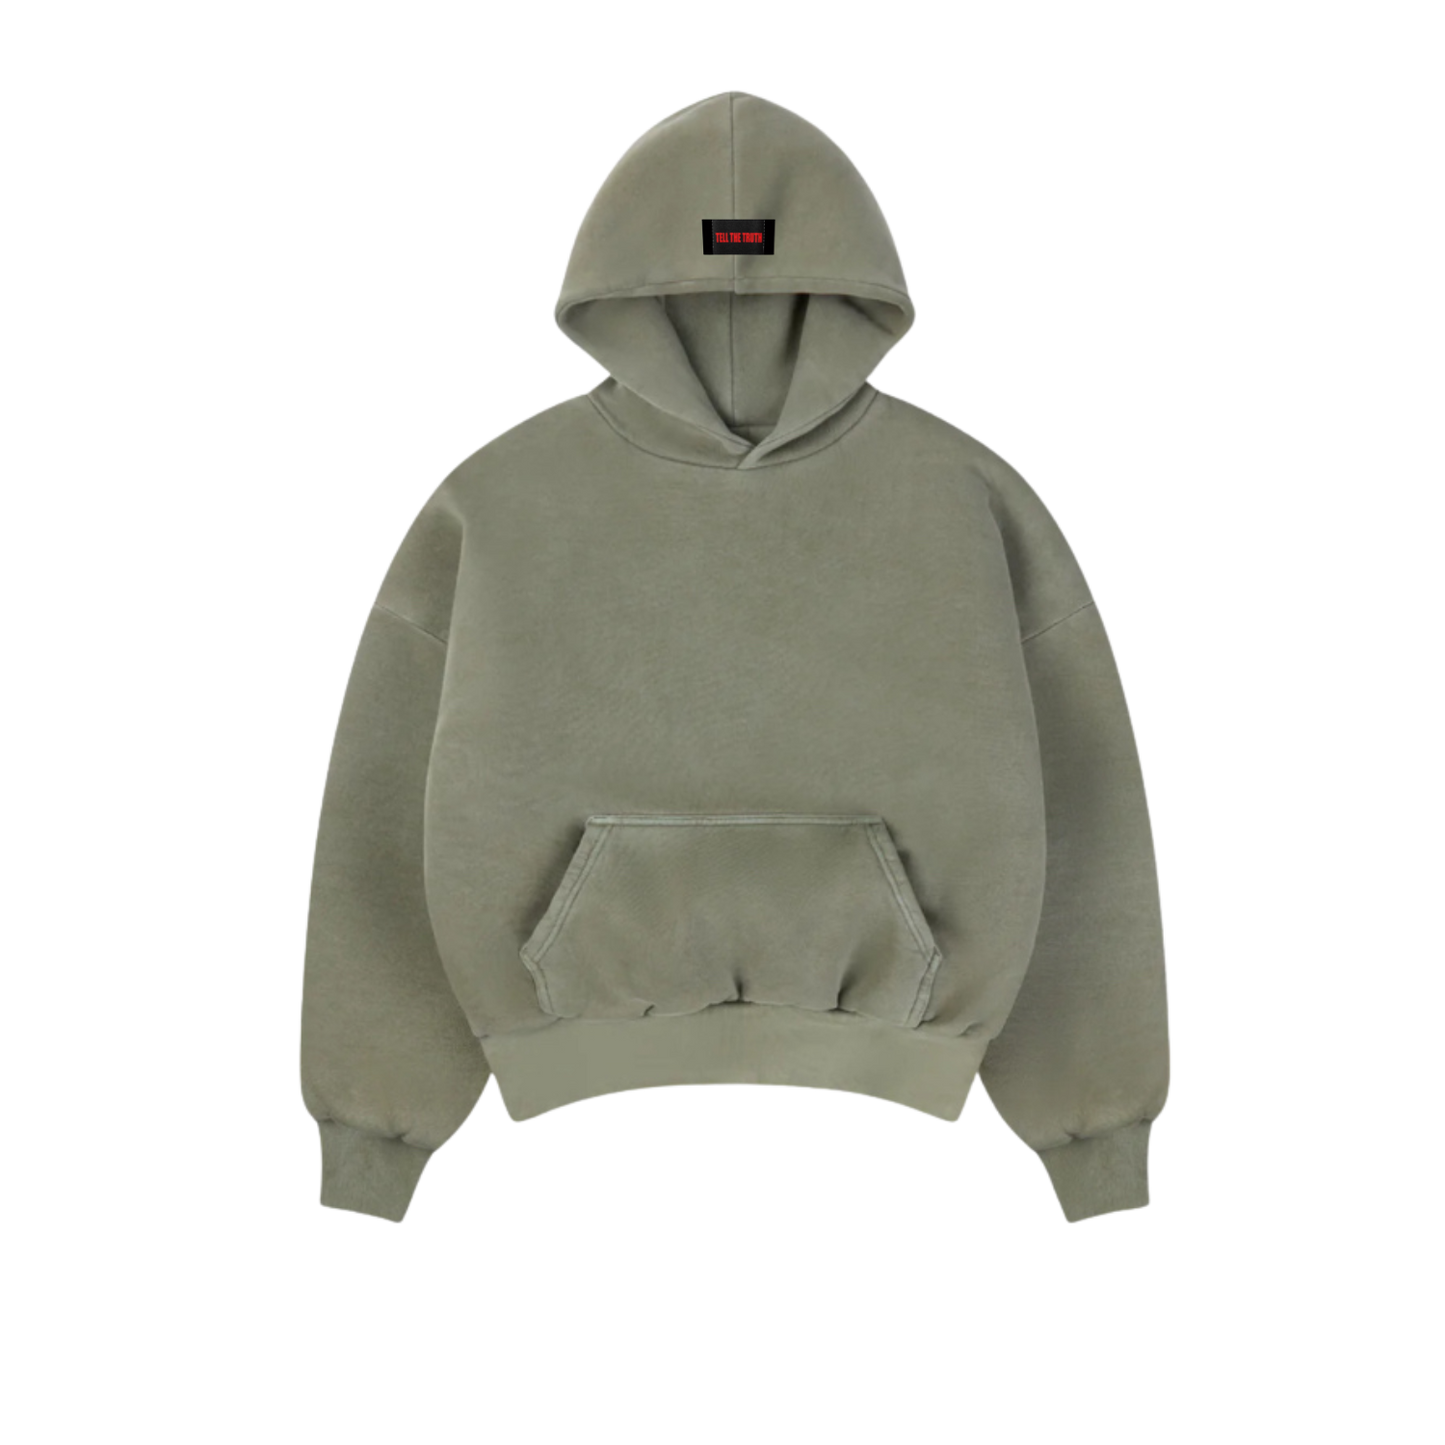 TELL THE TRUTH HOODIE